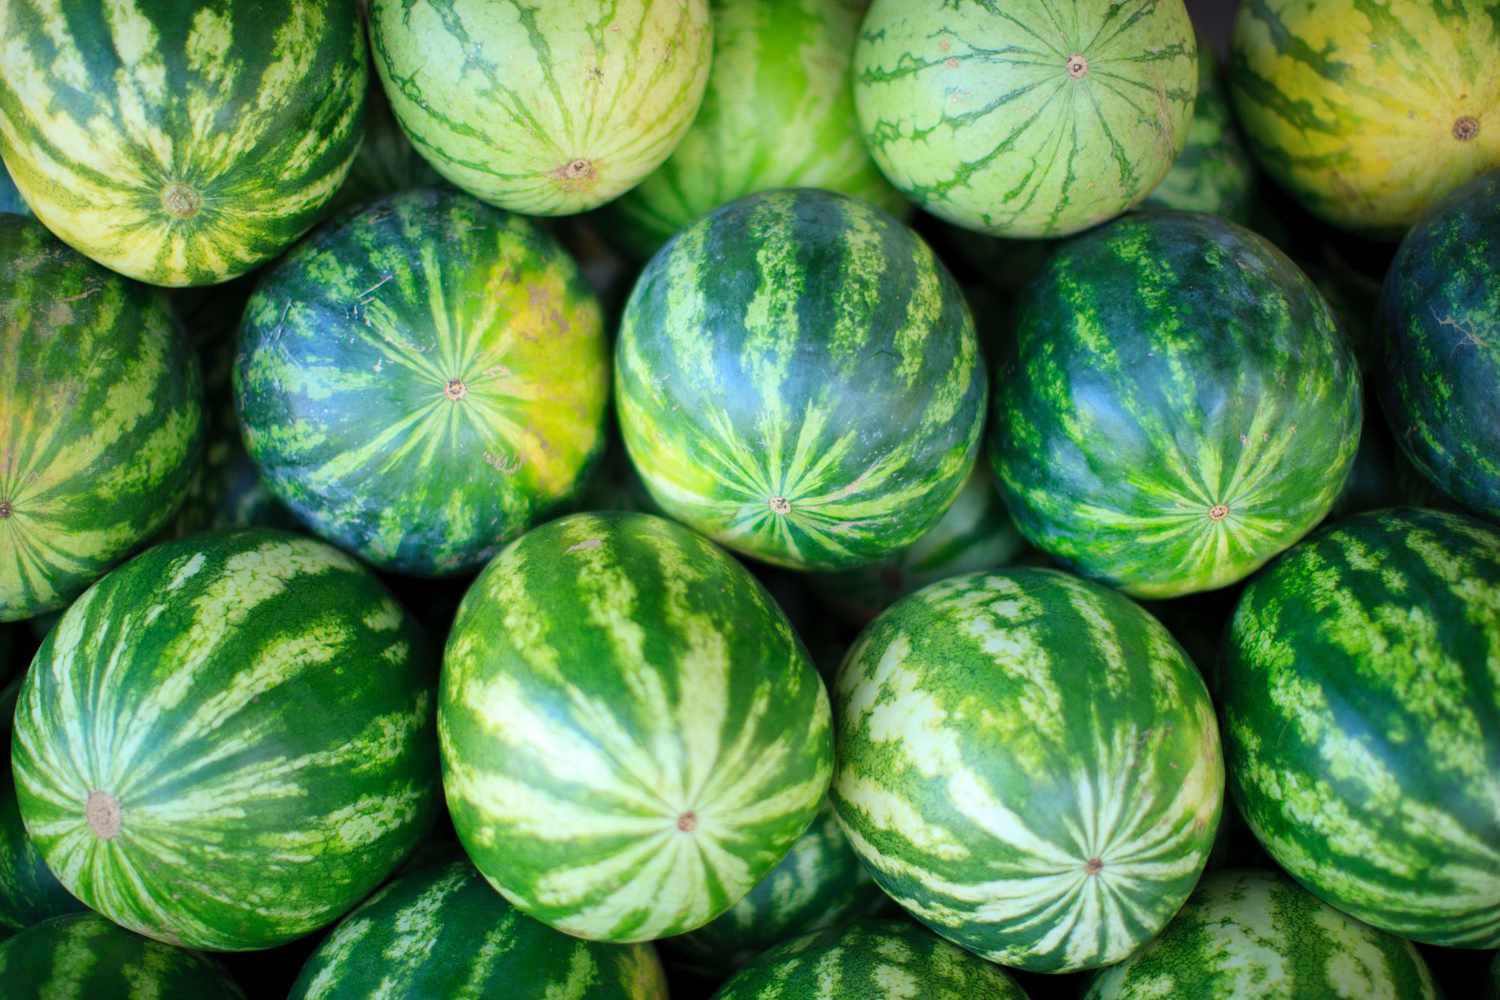 watermelons stacked on top of each other